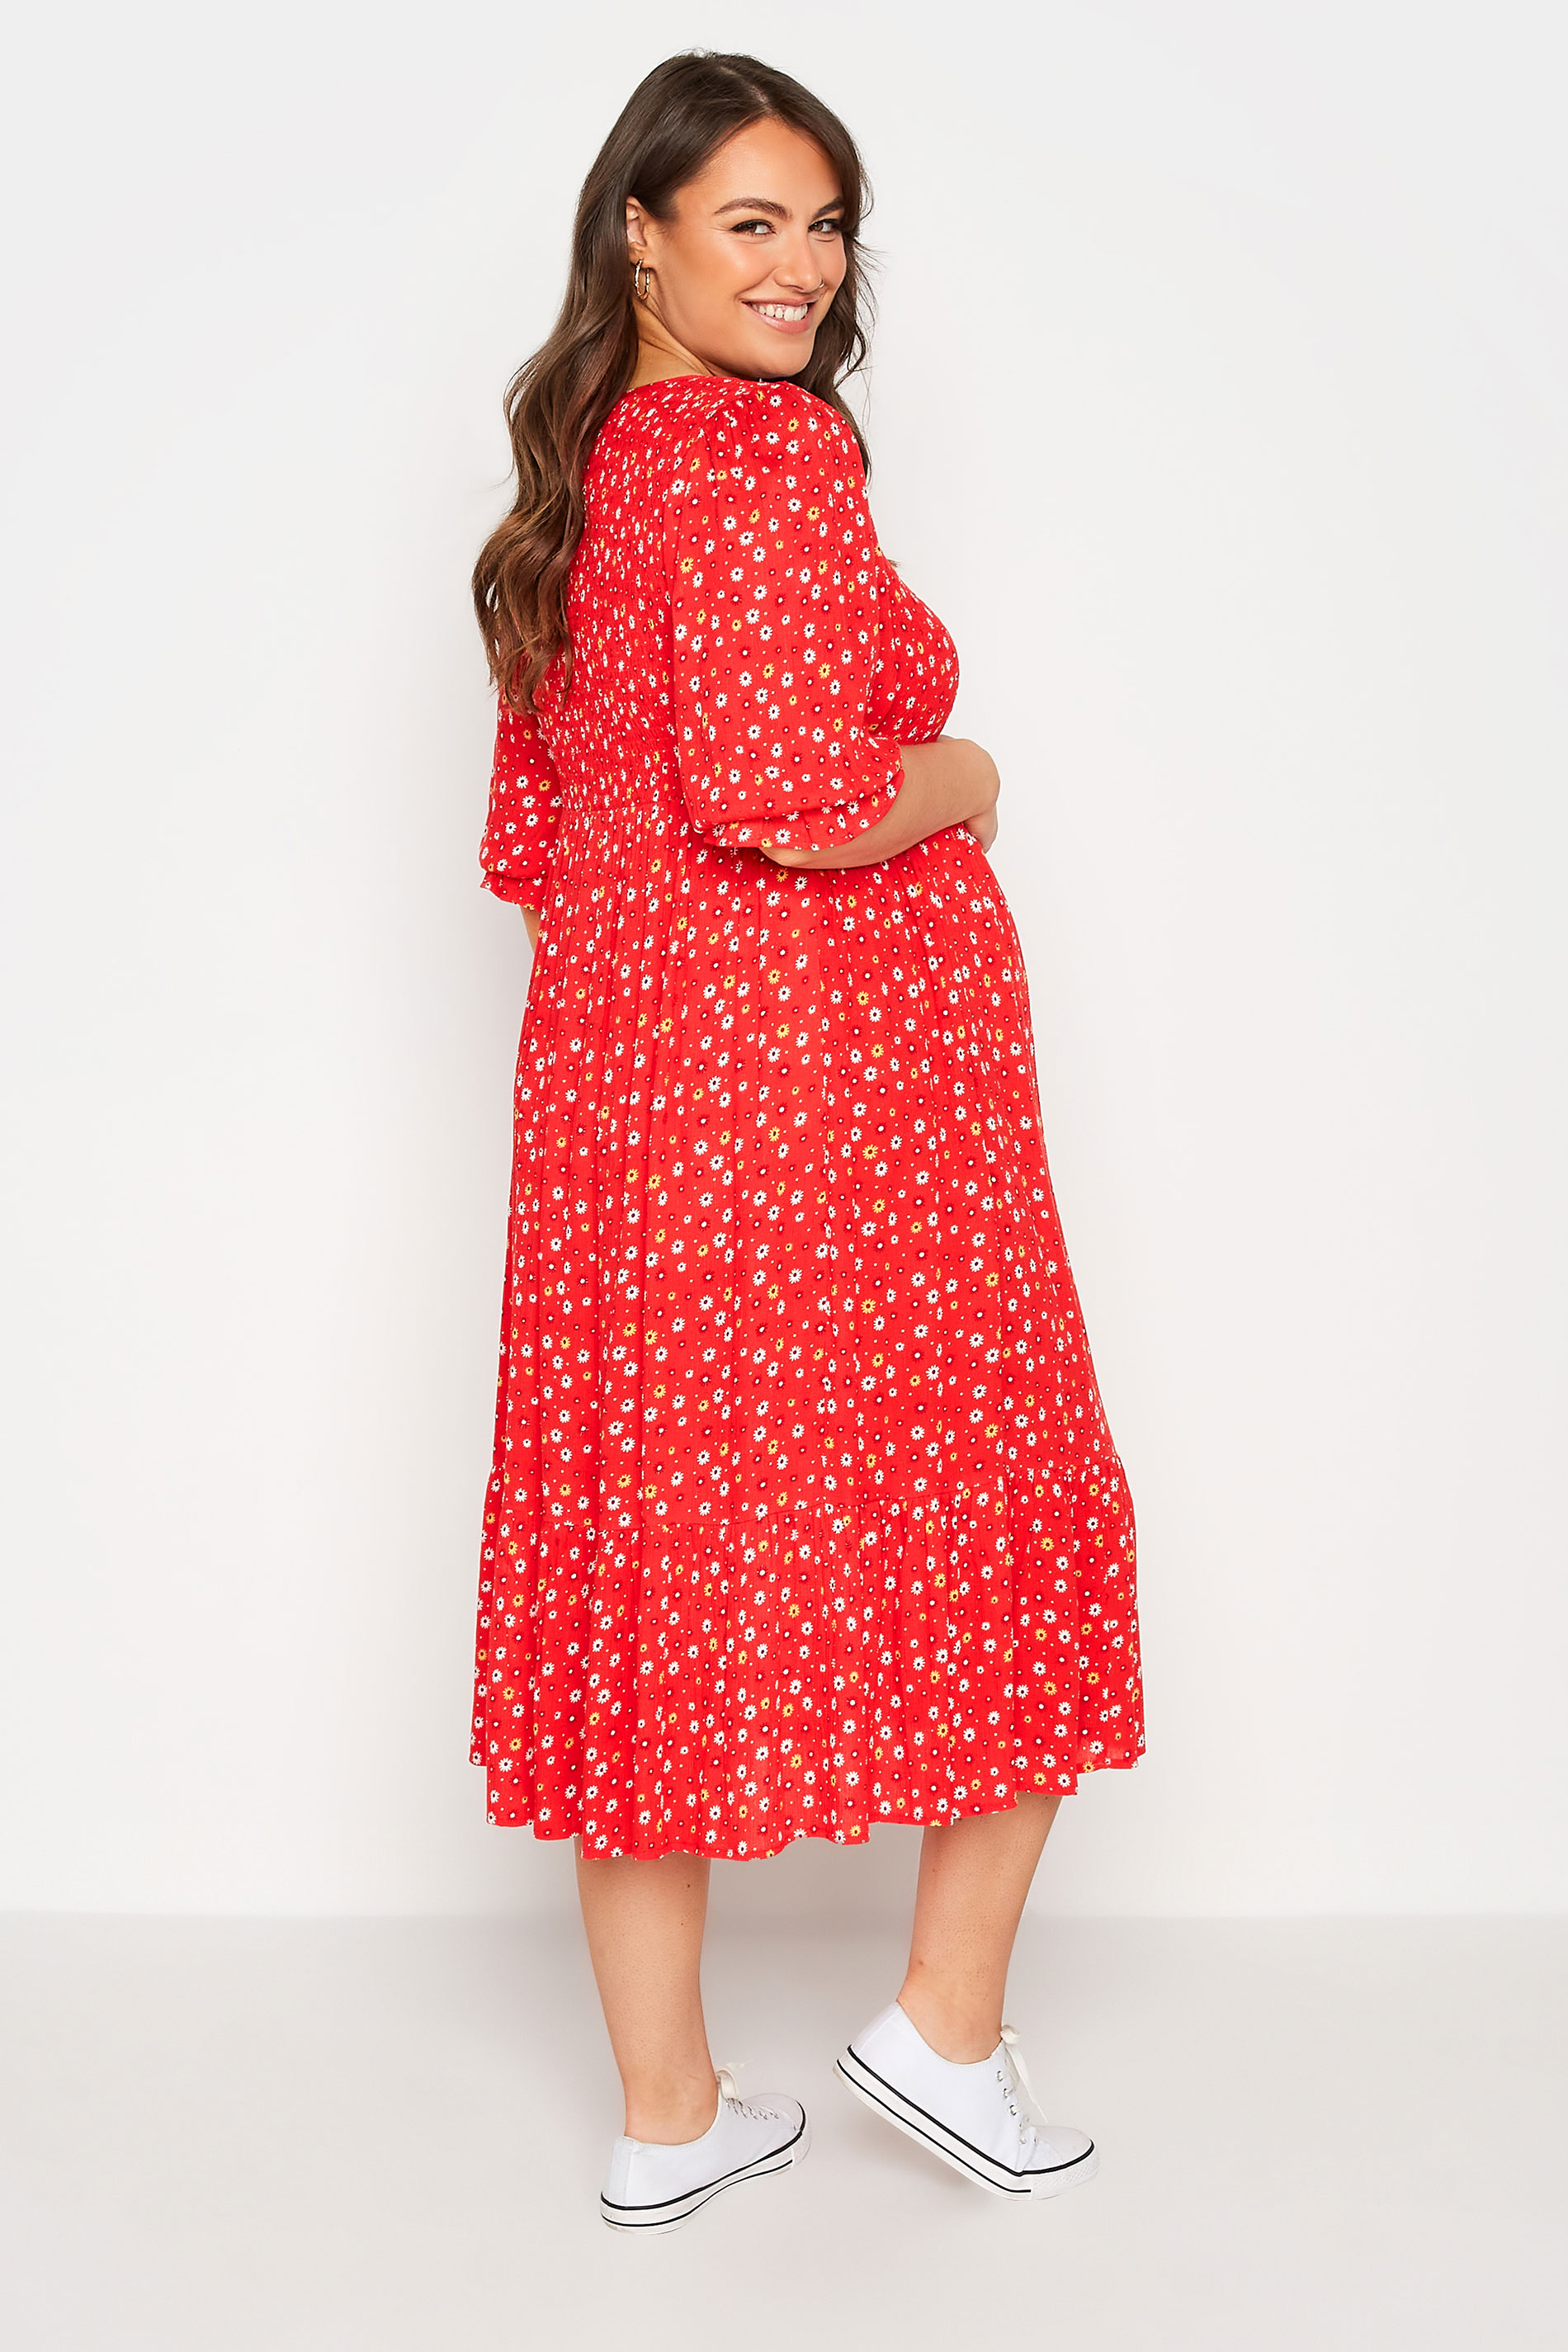 BUMP IT UP MATERNITY Plus Size Red Ditsy Print Tiered Dress | Yours Clothing 3